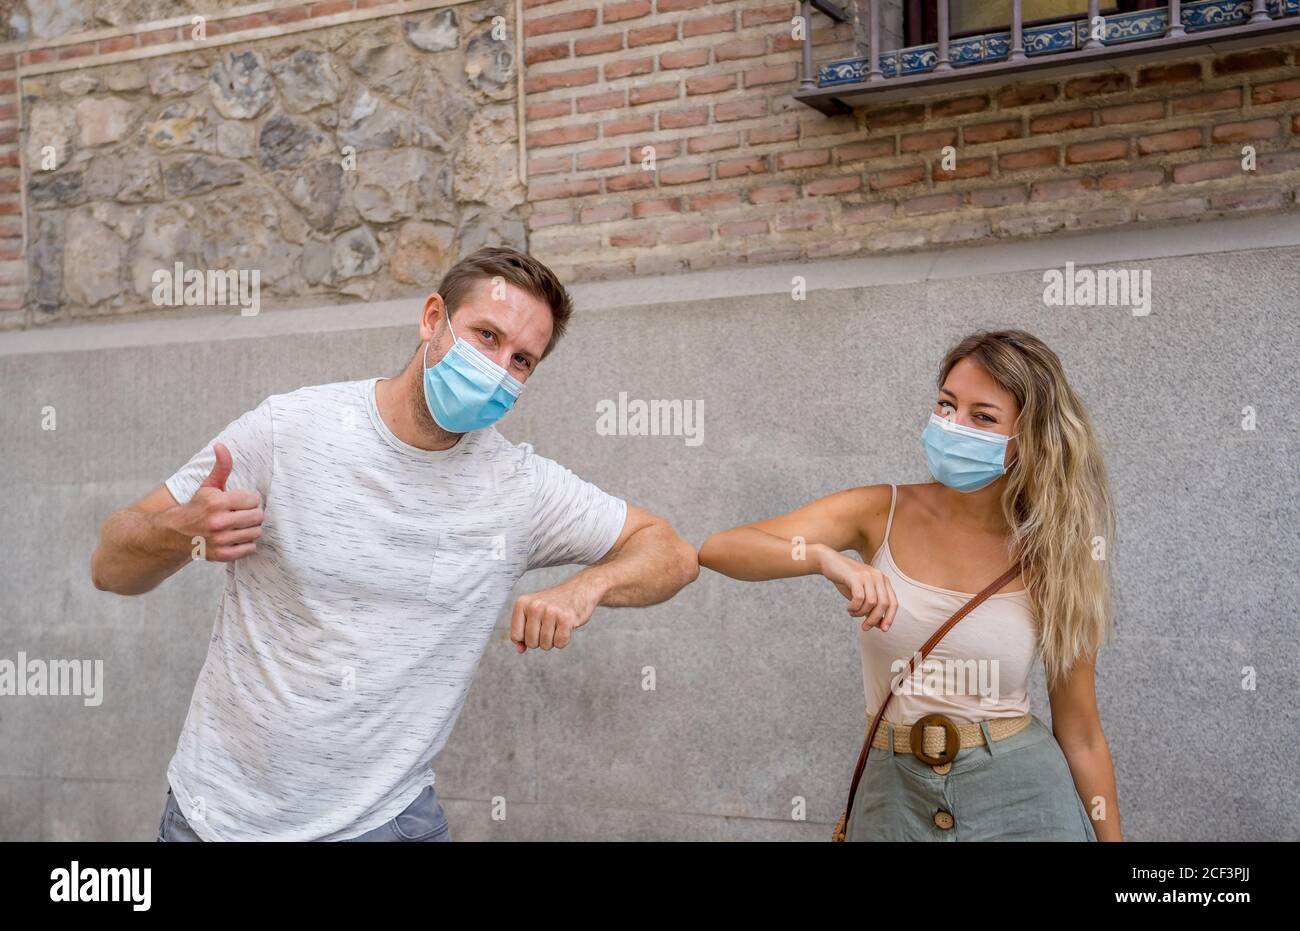 Safer way of greeting in the New Normal. Man and woman foot shaking and elbow bumping keeping social distancing to avoid Coronavirus spread. COVID-19 Stock Photo